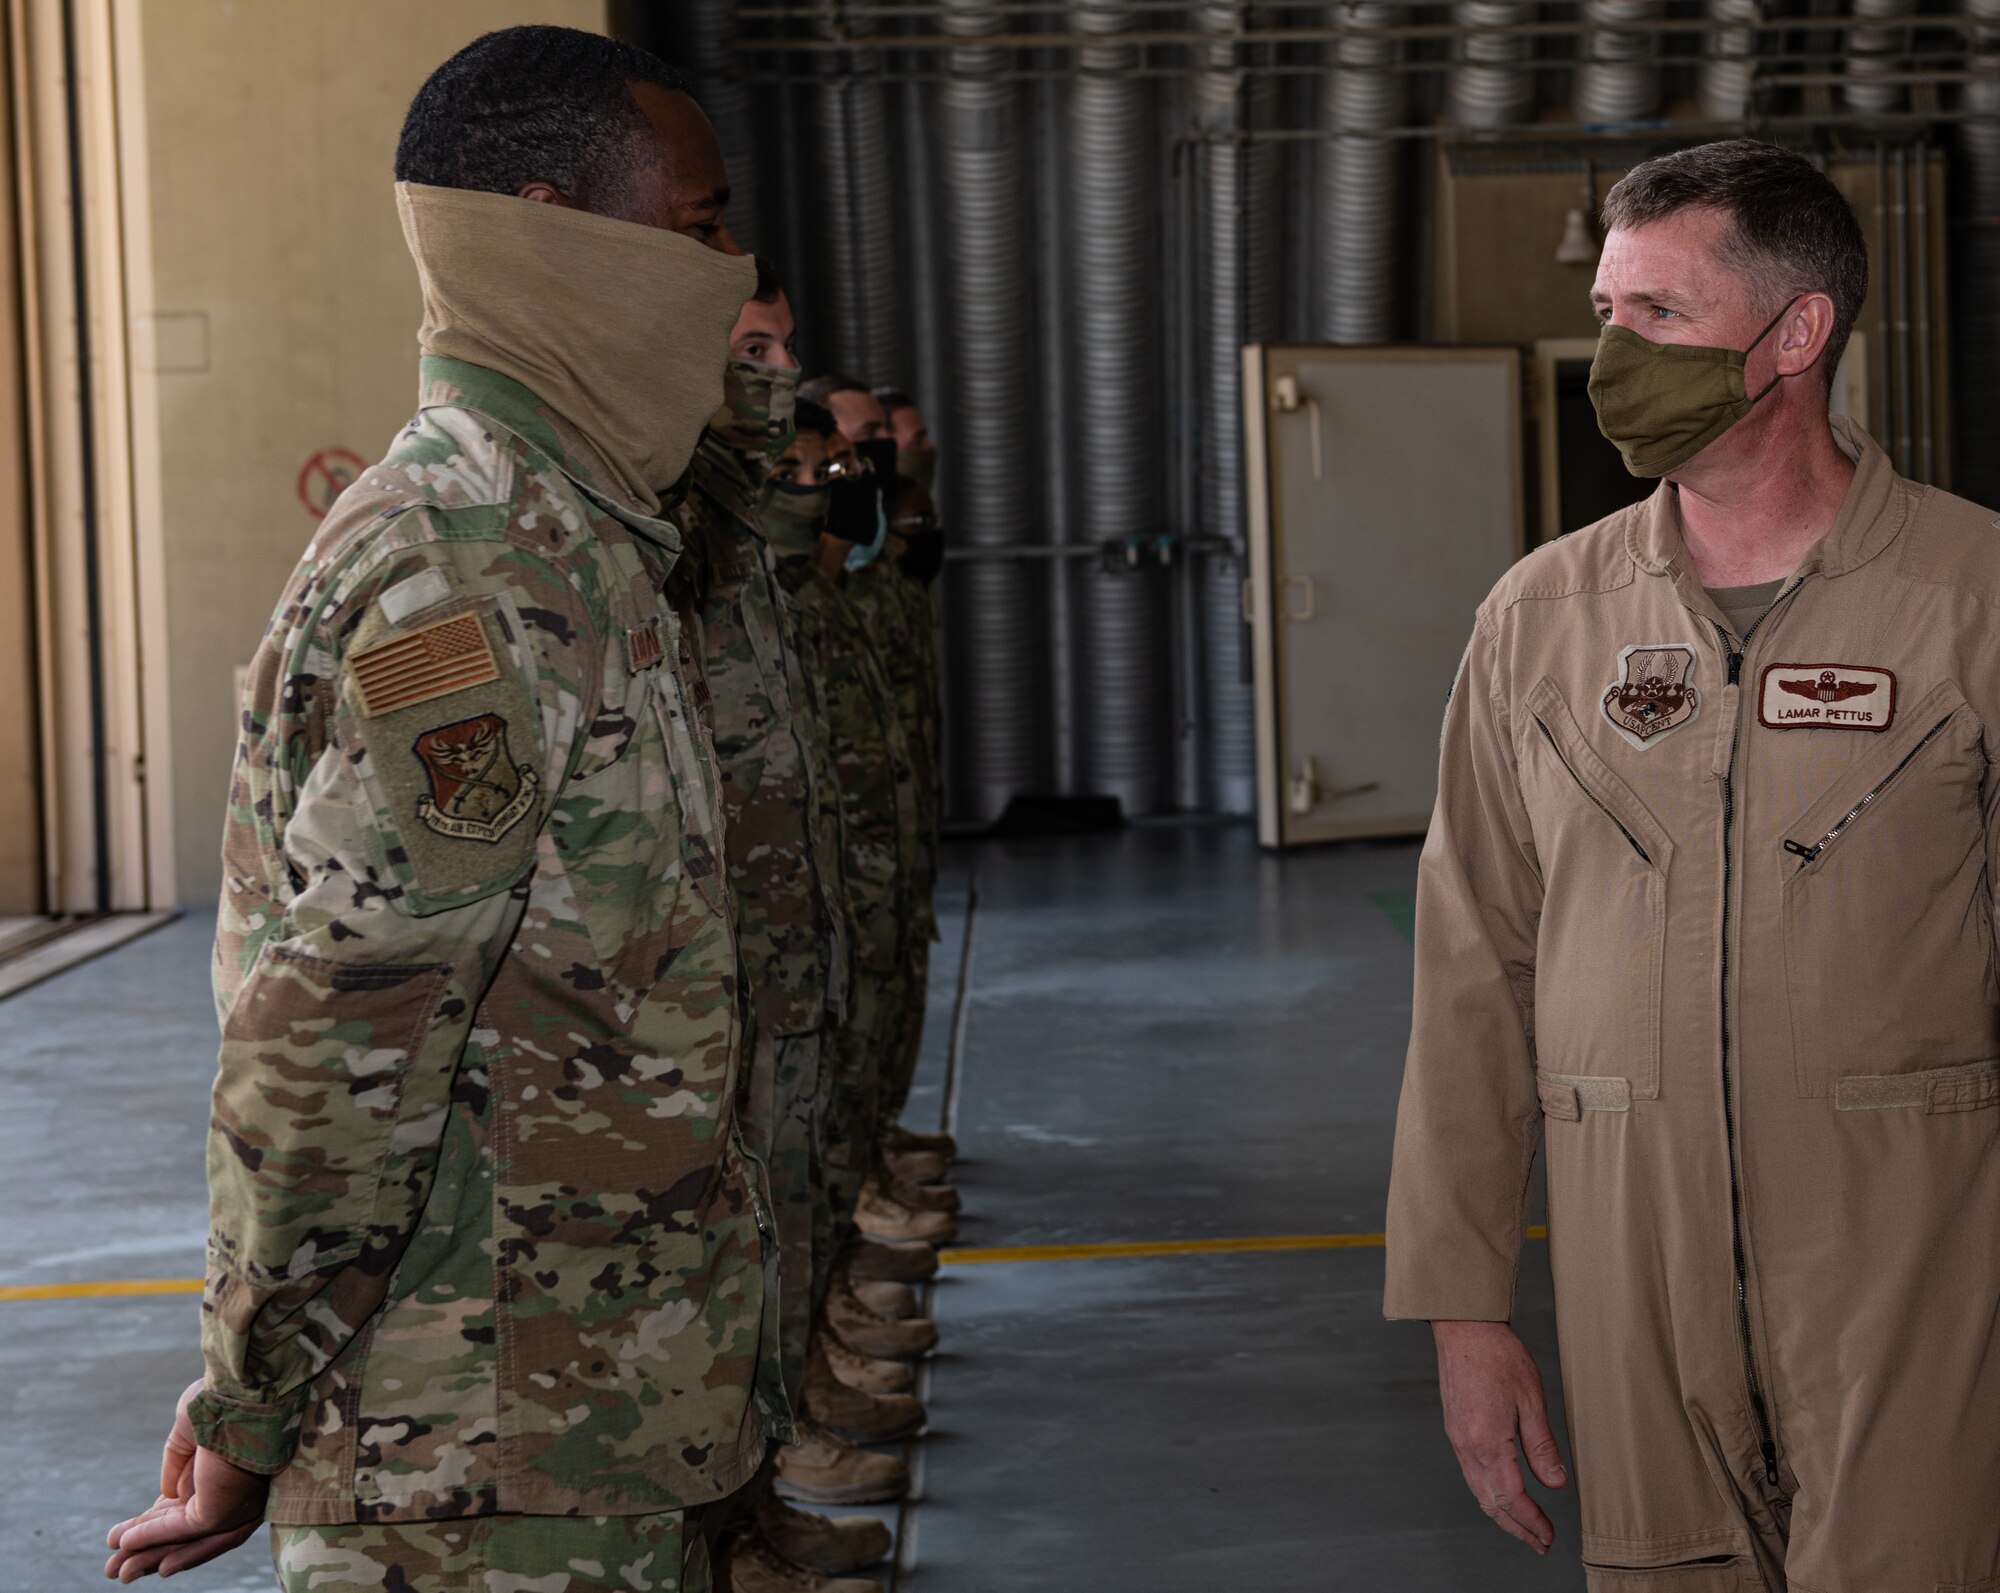 Brig. Gen. Evan Pettus, 378th Air Expeditionary Wing commander, speaks with Airmen from the 378th Expeditionary Maintenance Squadron ahead of an Agile Combat Employment capstone event Feb. 27, 2021, at an airbase in the Kingdom of Saudi Arabia.